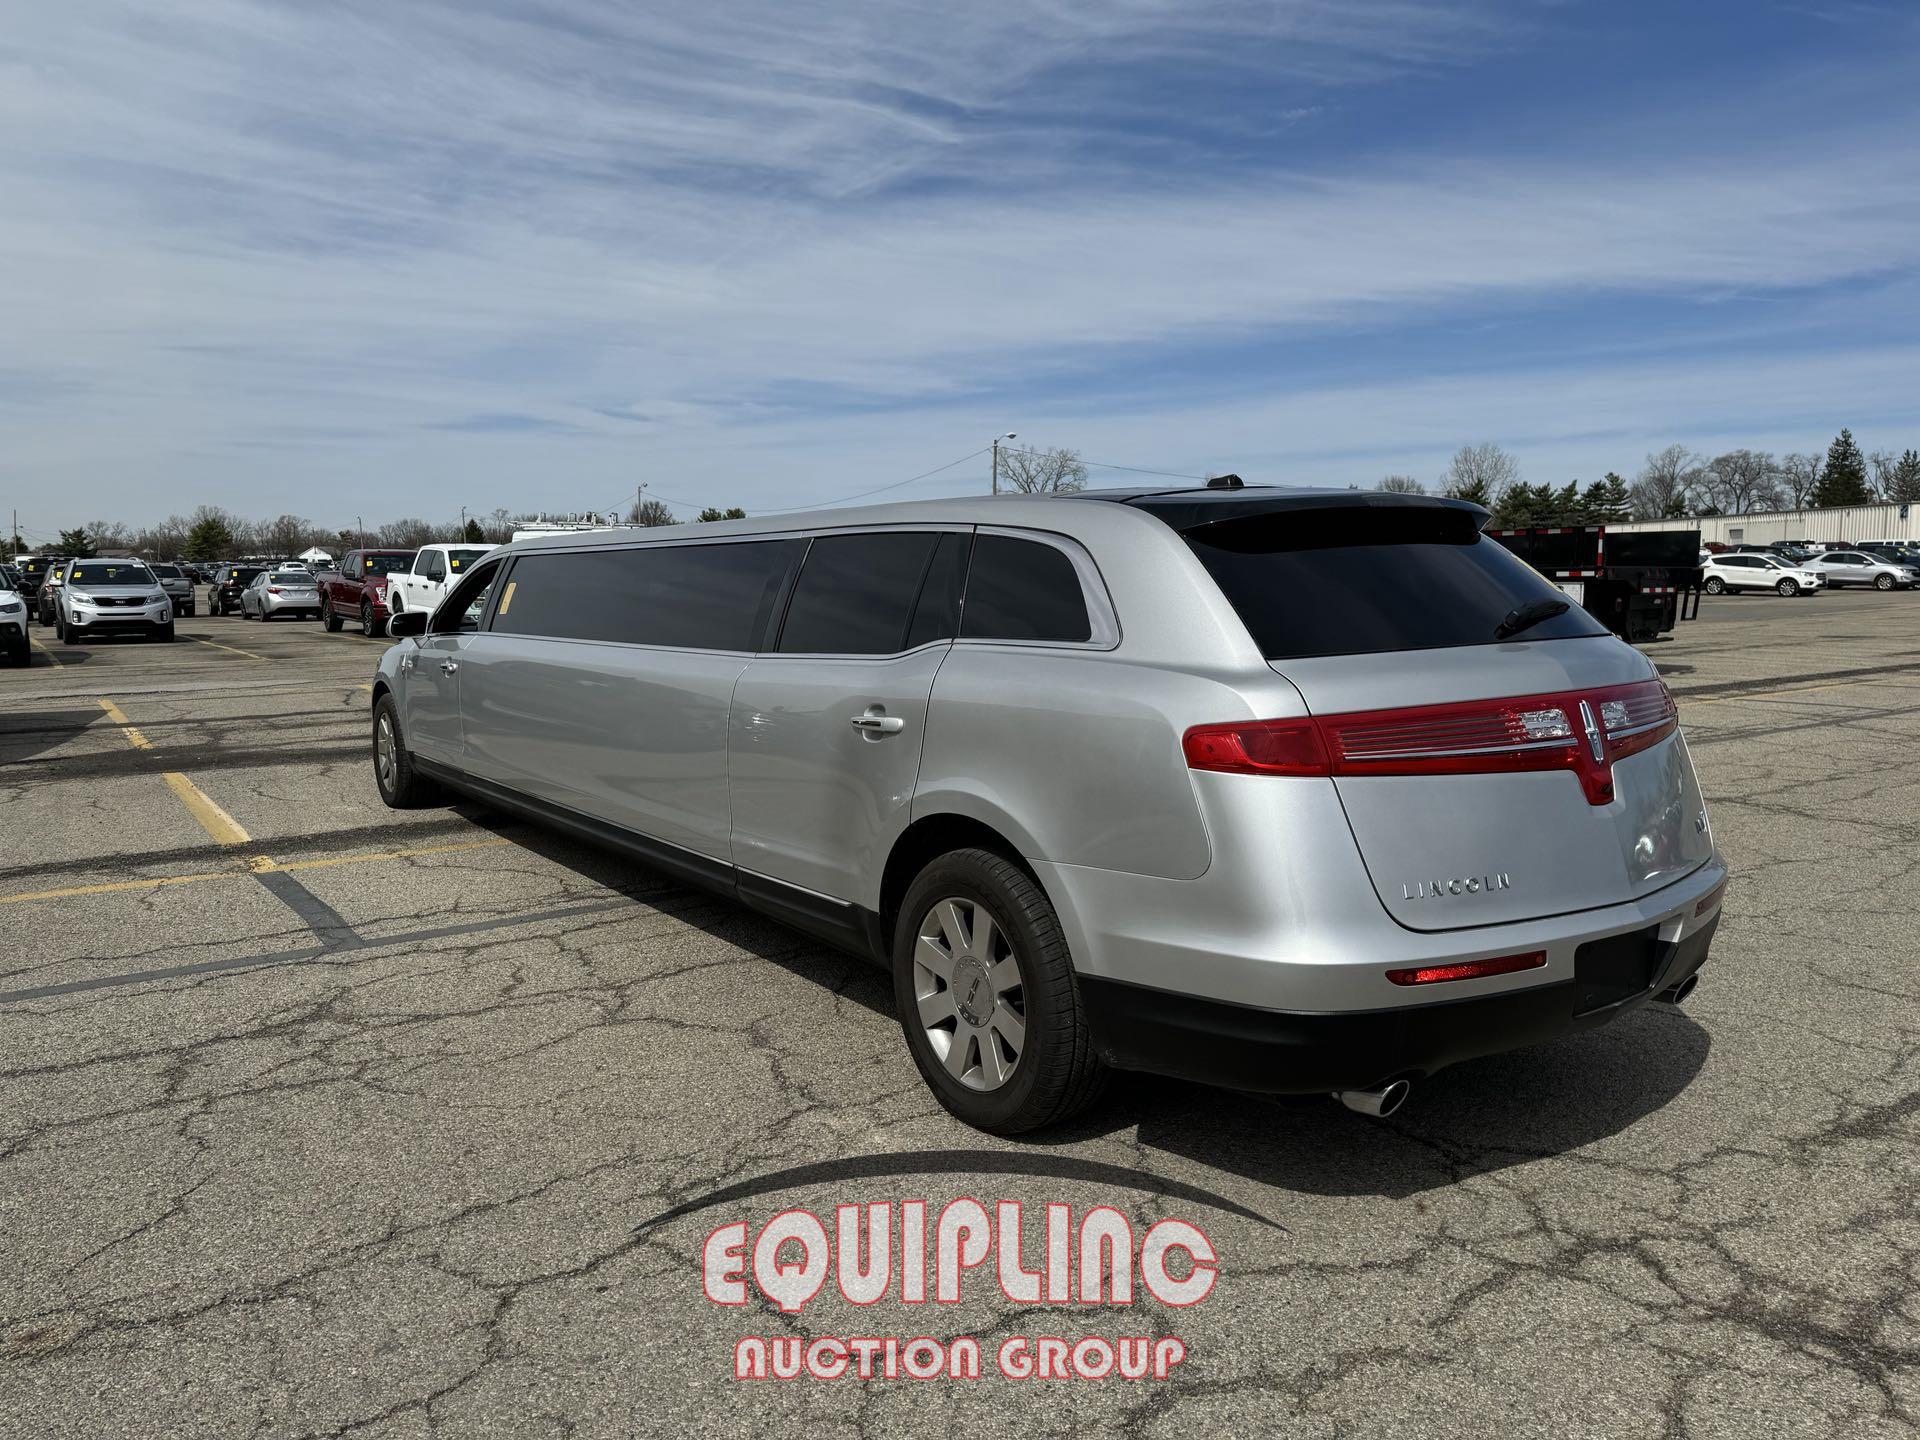 2019 LINCOLN 120-inch MKT LIMOUSINE